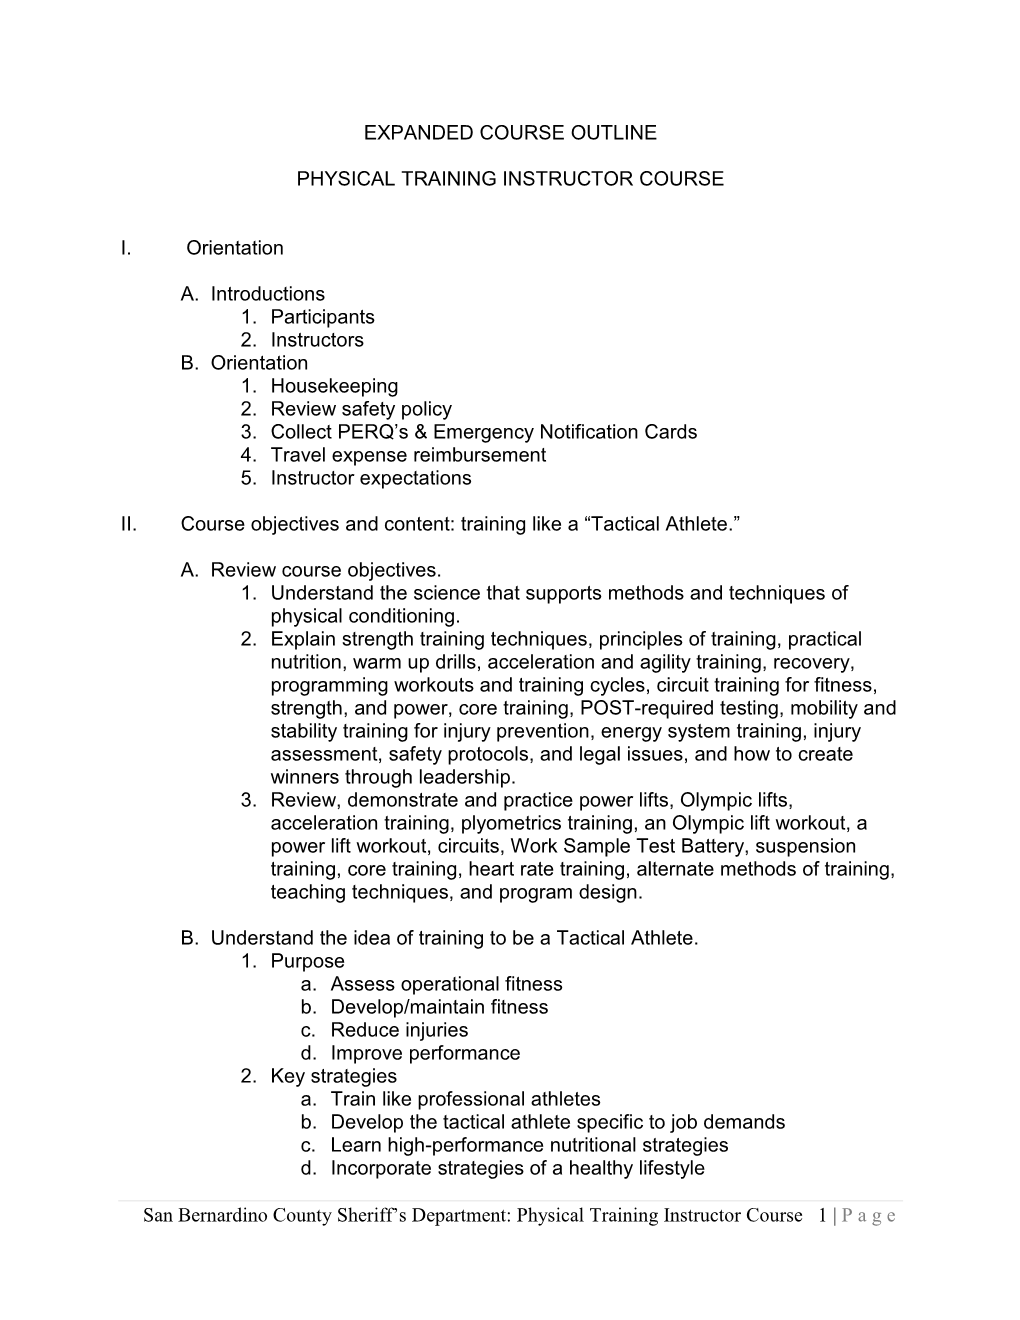 Physical Training Instructor Course Outline